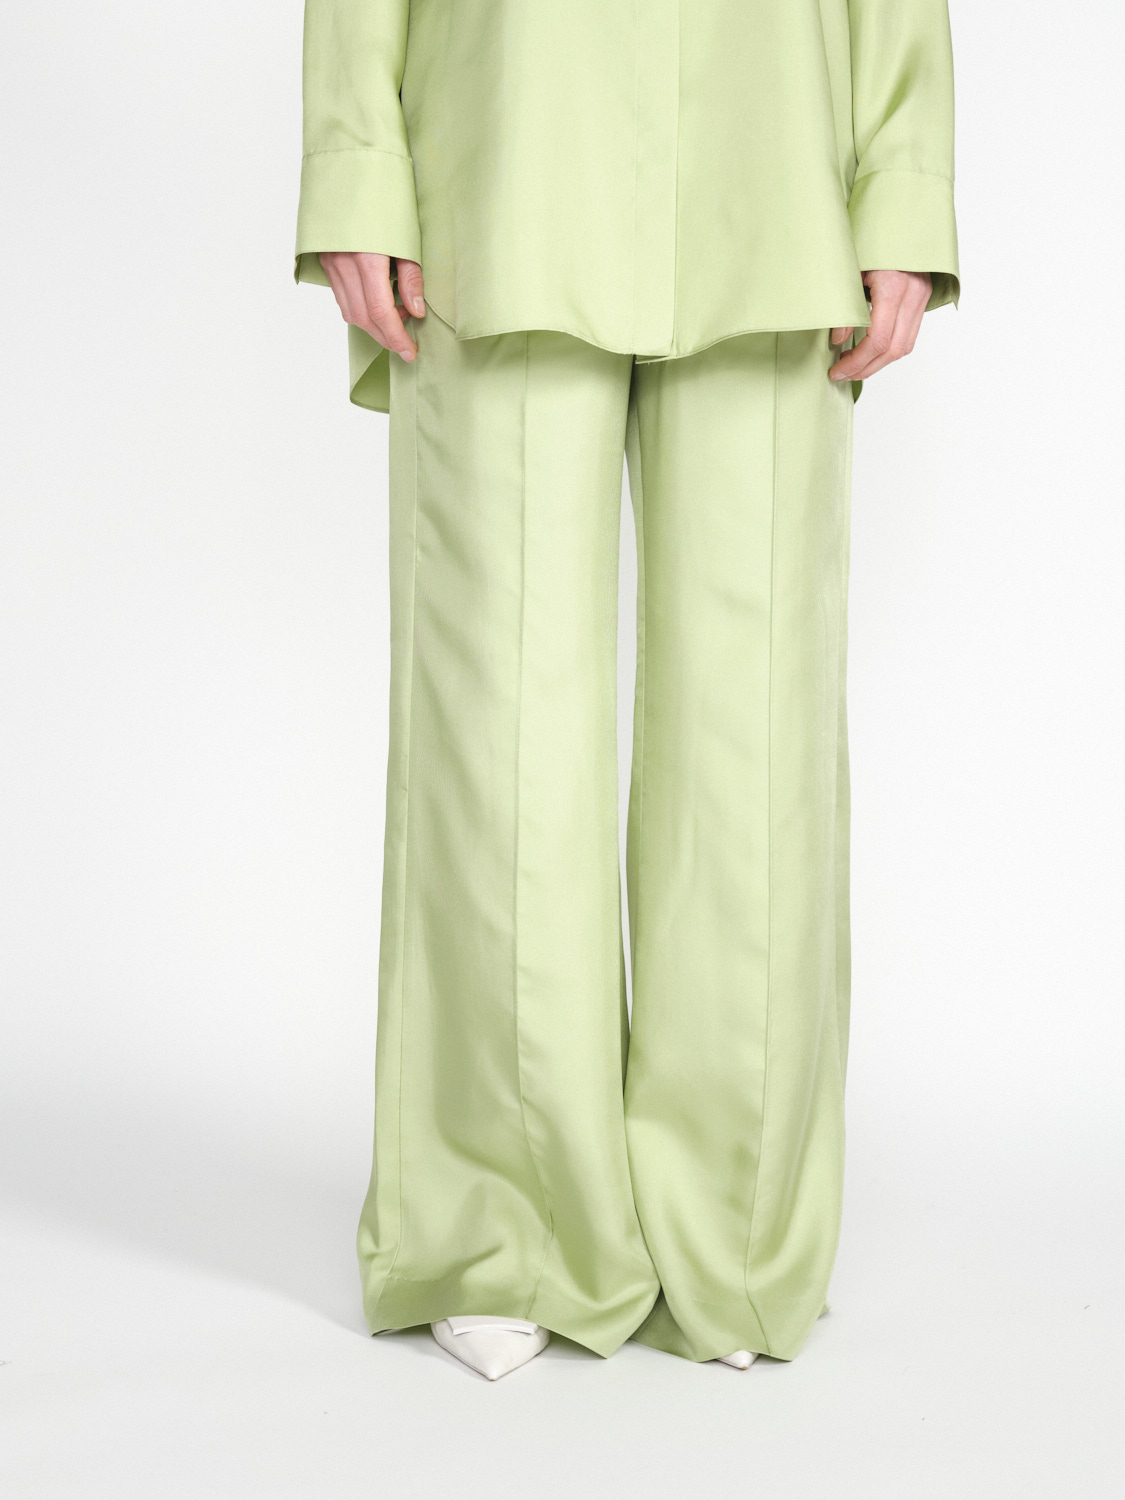 Sensual Coolness - Lightweight trousers made of silk twill 